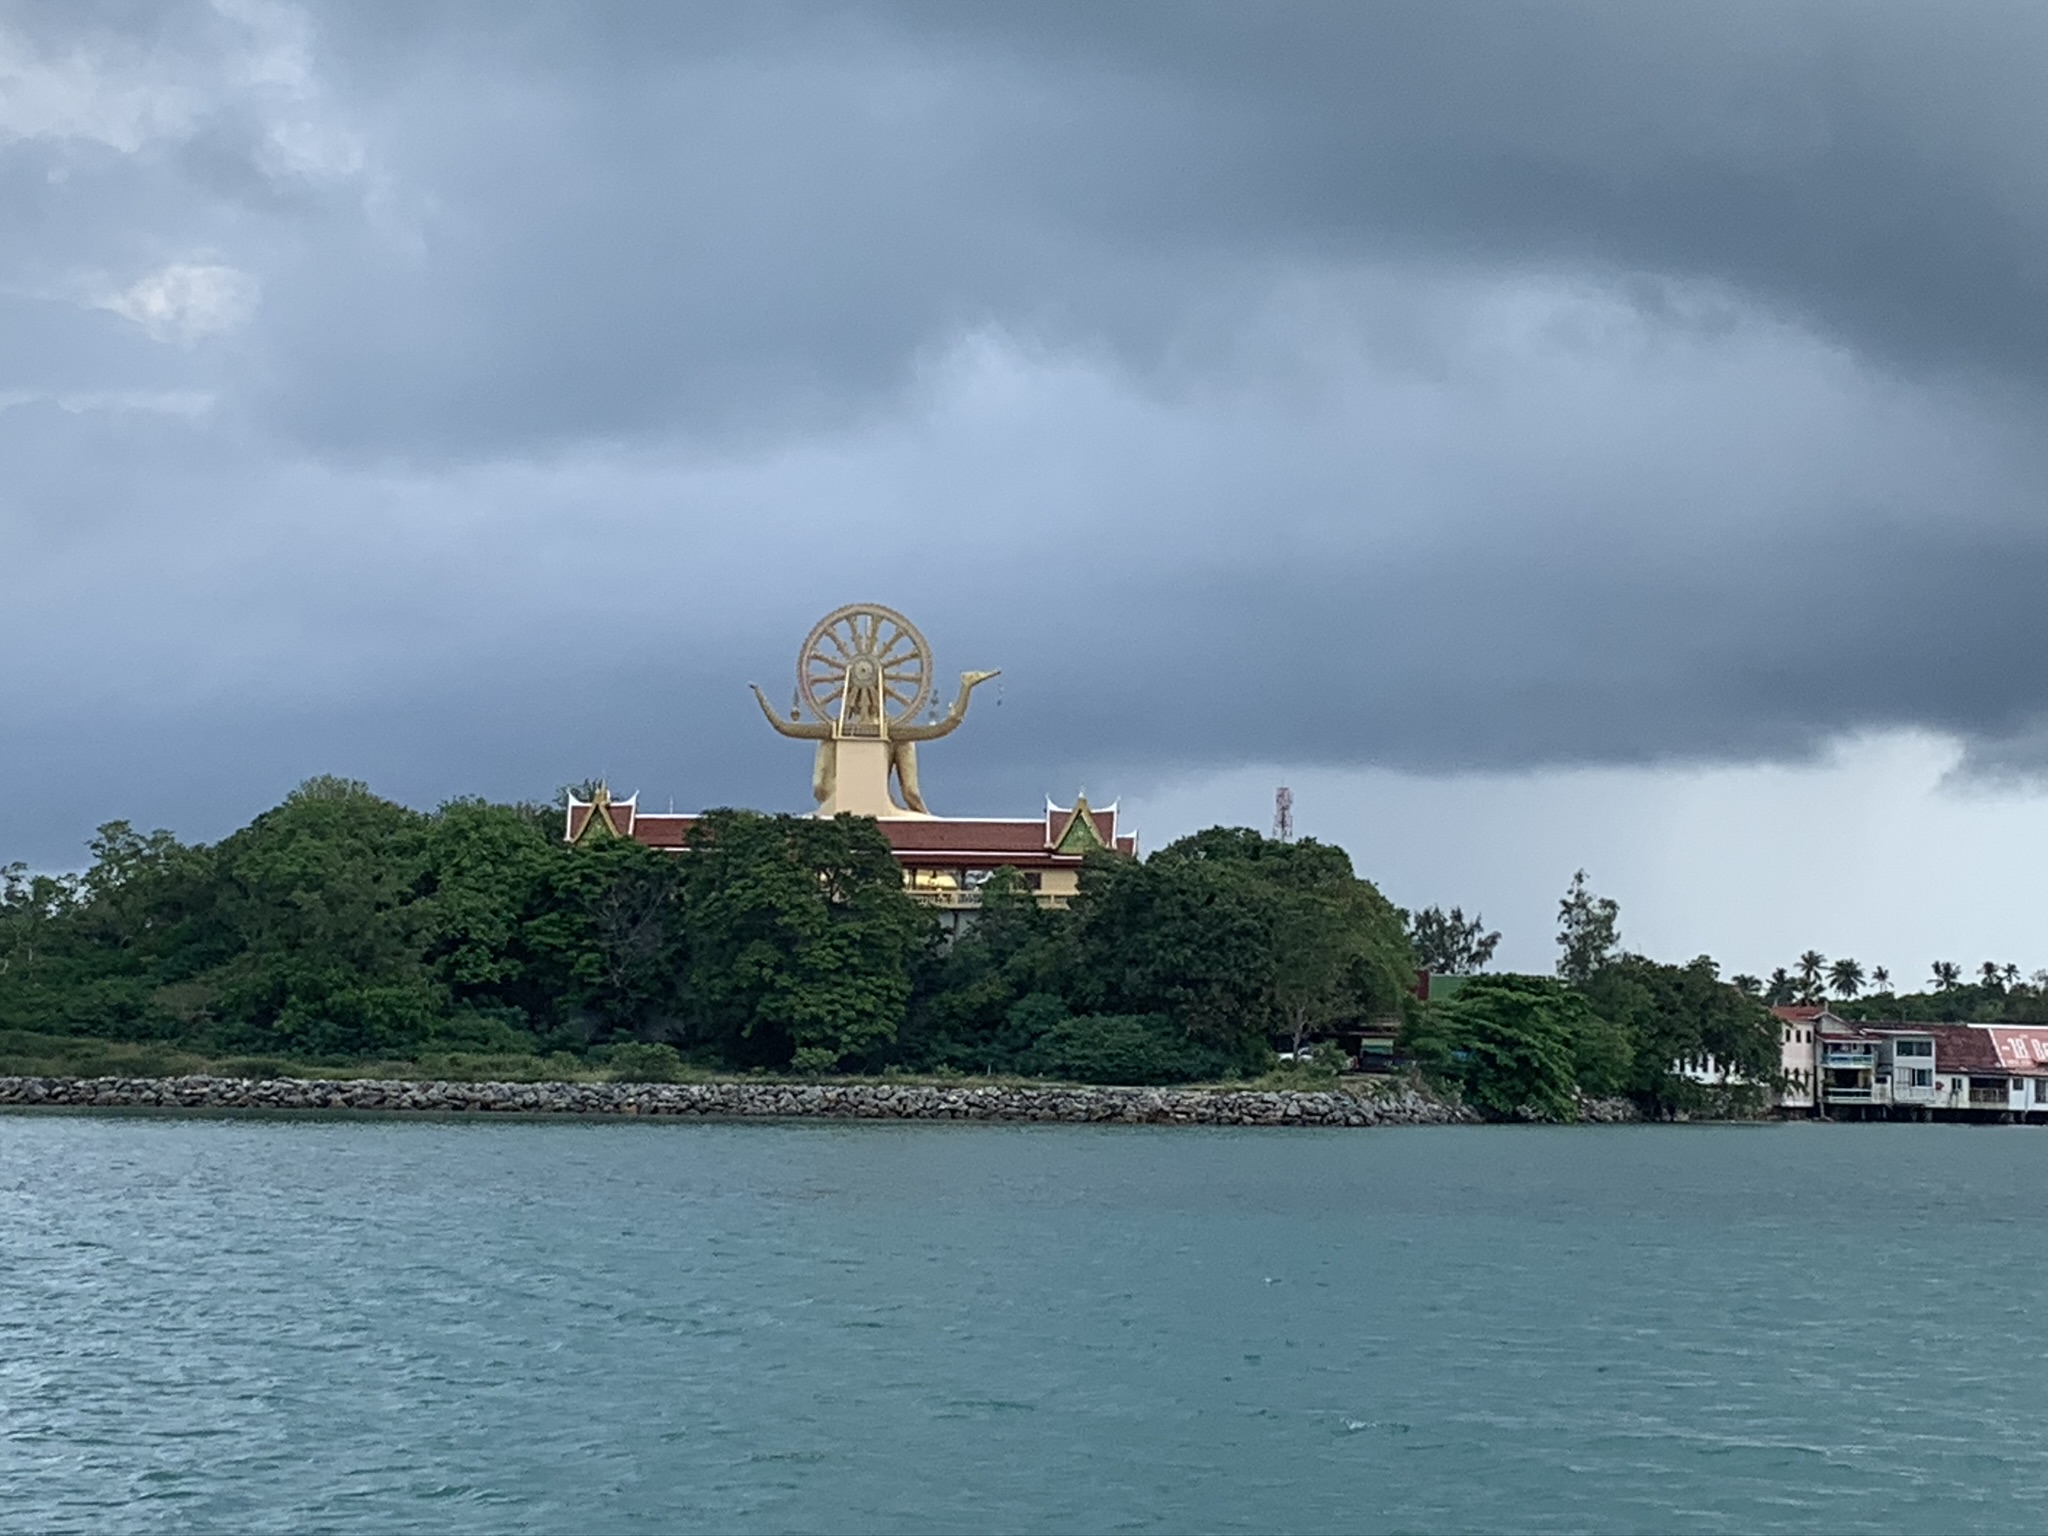 Boat ride in Tongsai Bay going to Leela Beach Resort, Ko Pha Ngan. Storm clouds rolling over made for a picturesque moment.